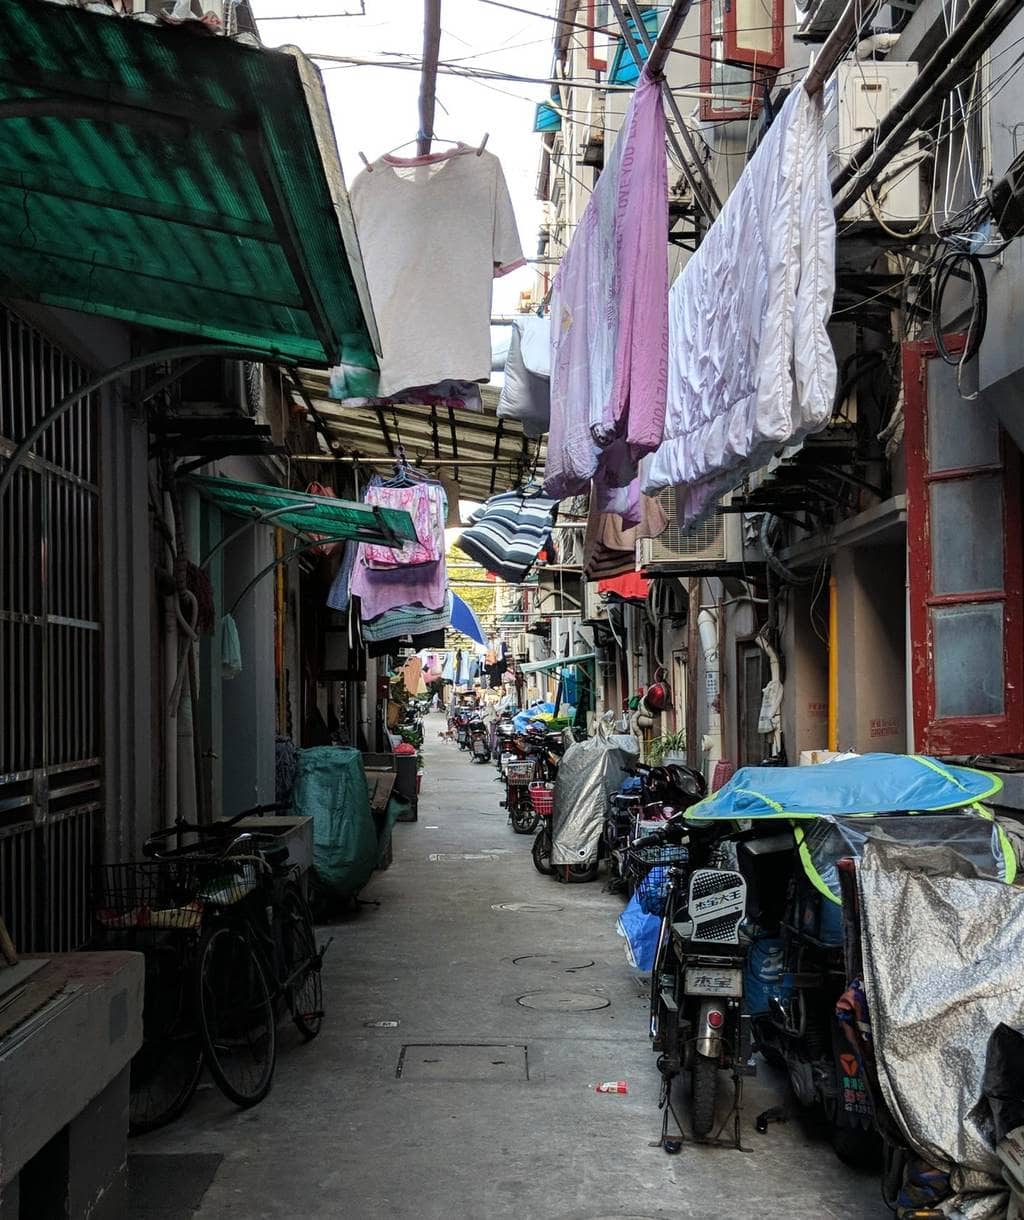 The back lanes of Shanghai